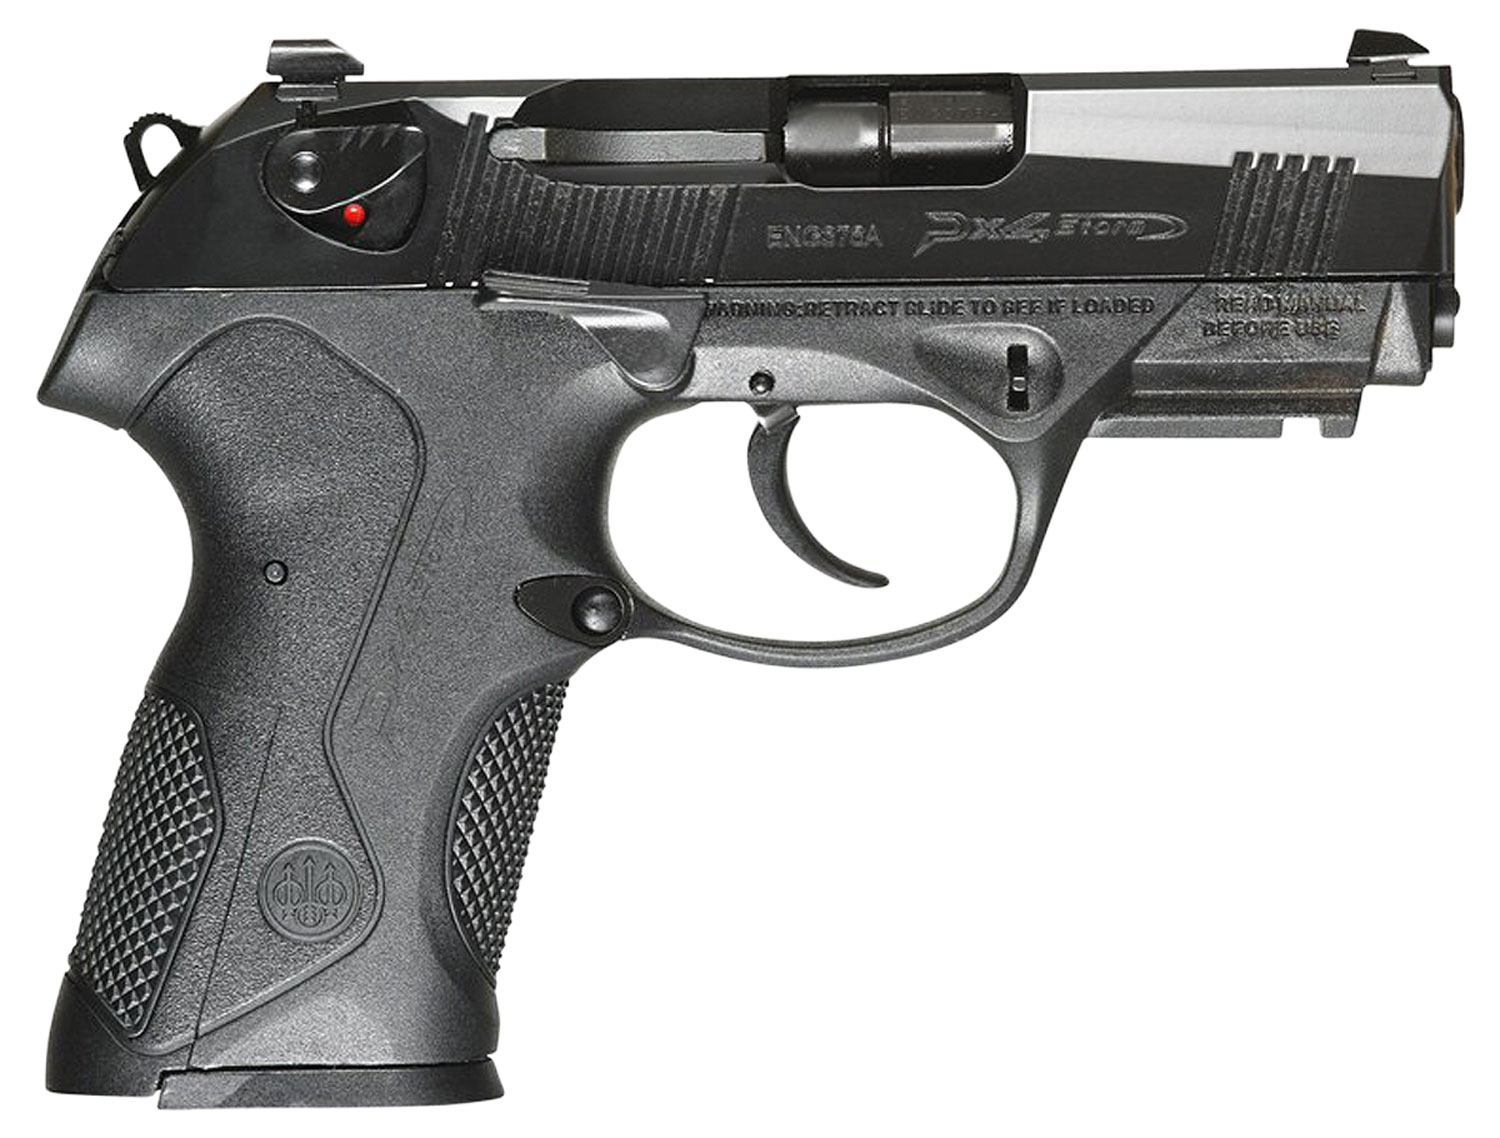 Beretta USA JXC9GEL Px4 Storm Compact Carry 9mm Luger Caliber with 3.20